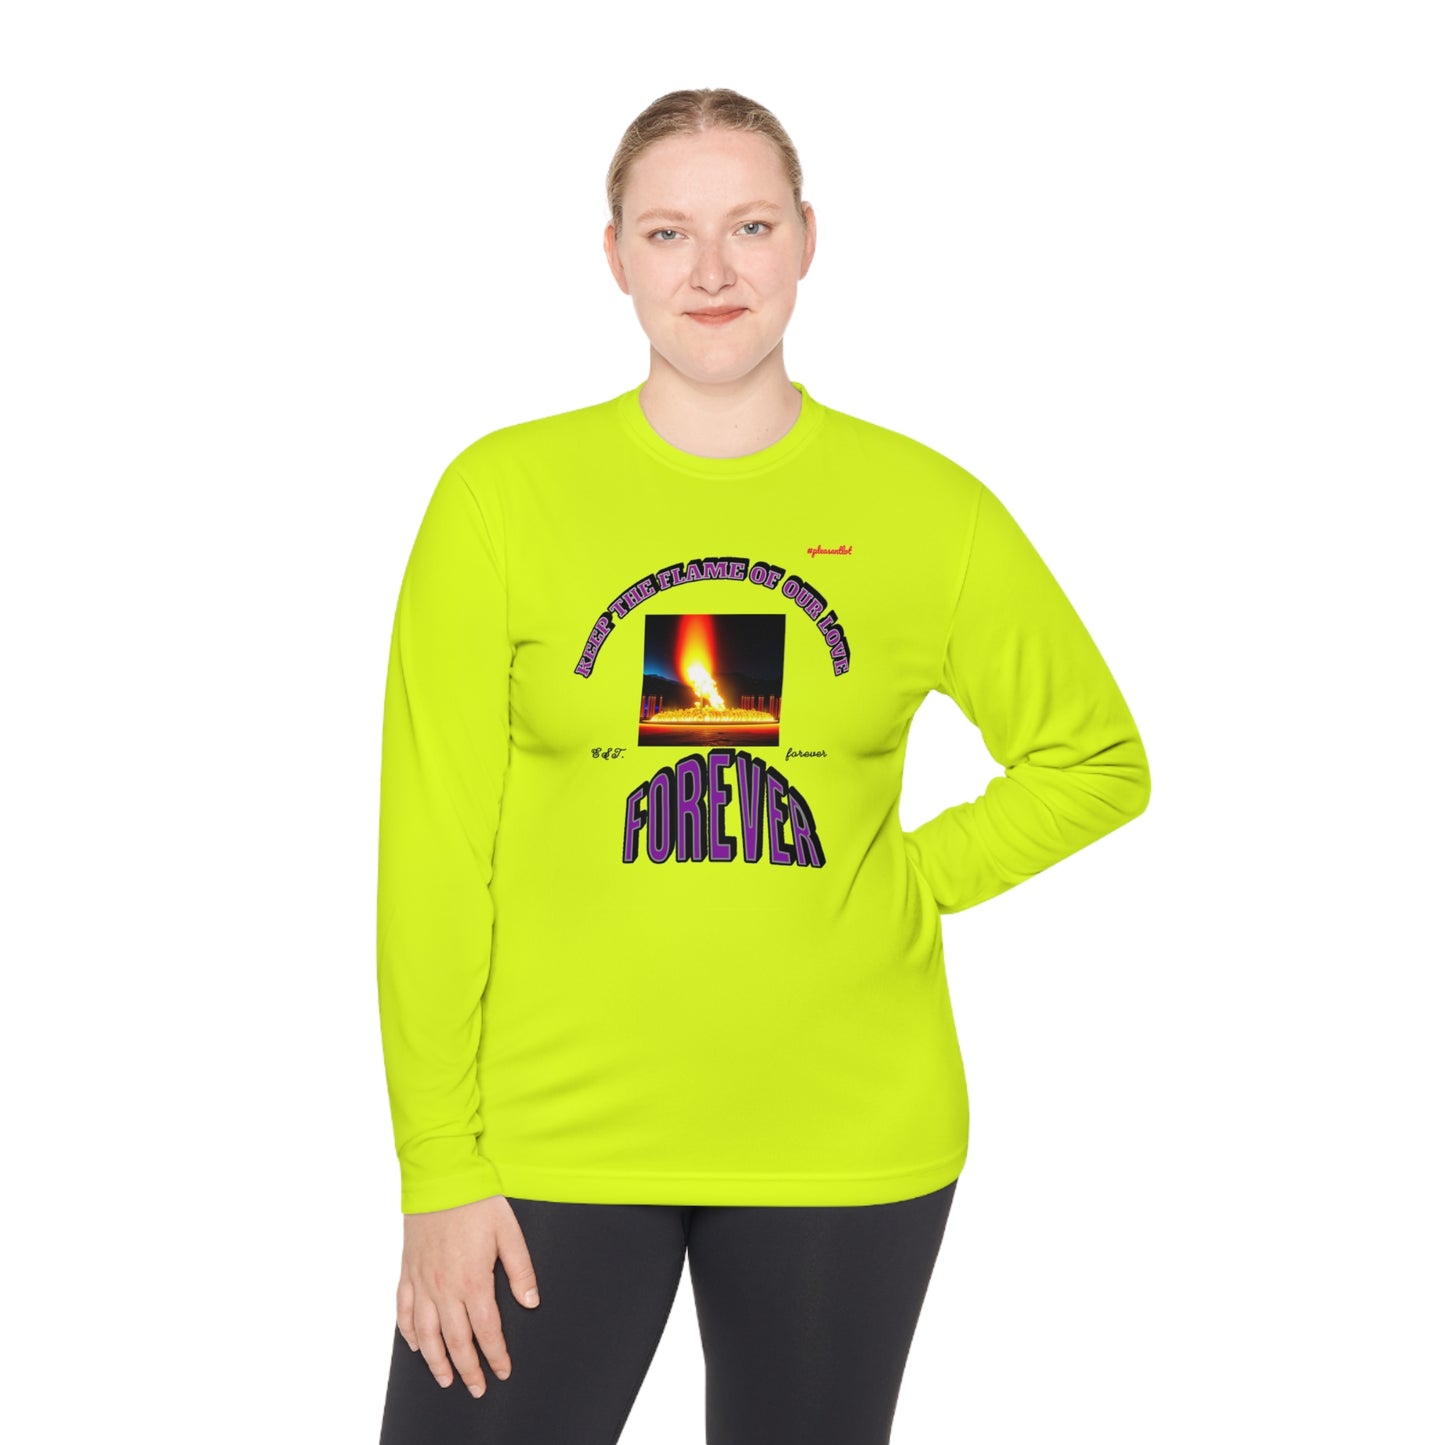 Moisture wicking Unisex Lightweight Long Sleeve Tee-(Keep The Flame Of Our Love Forever)